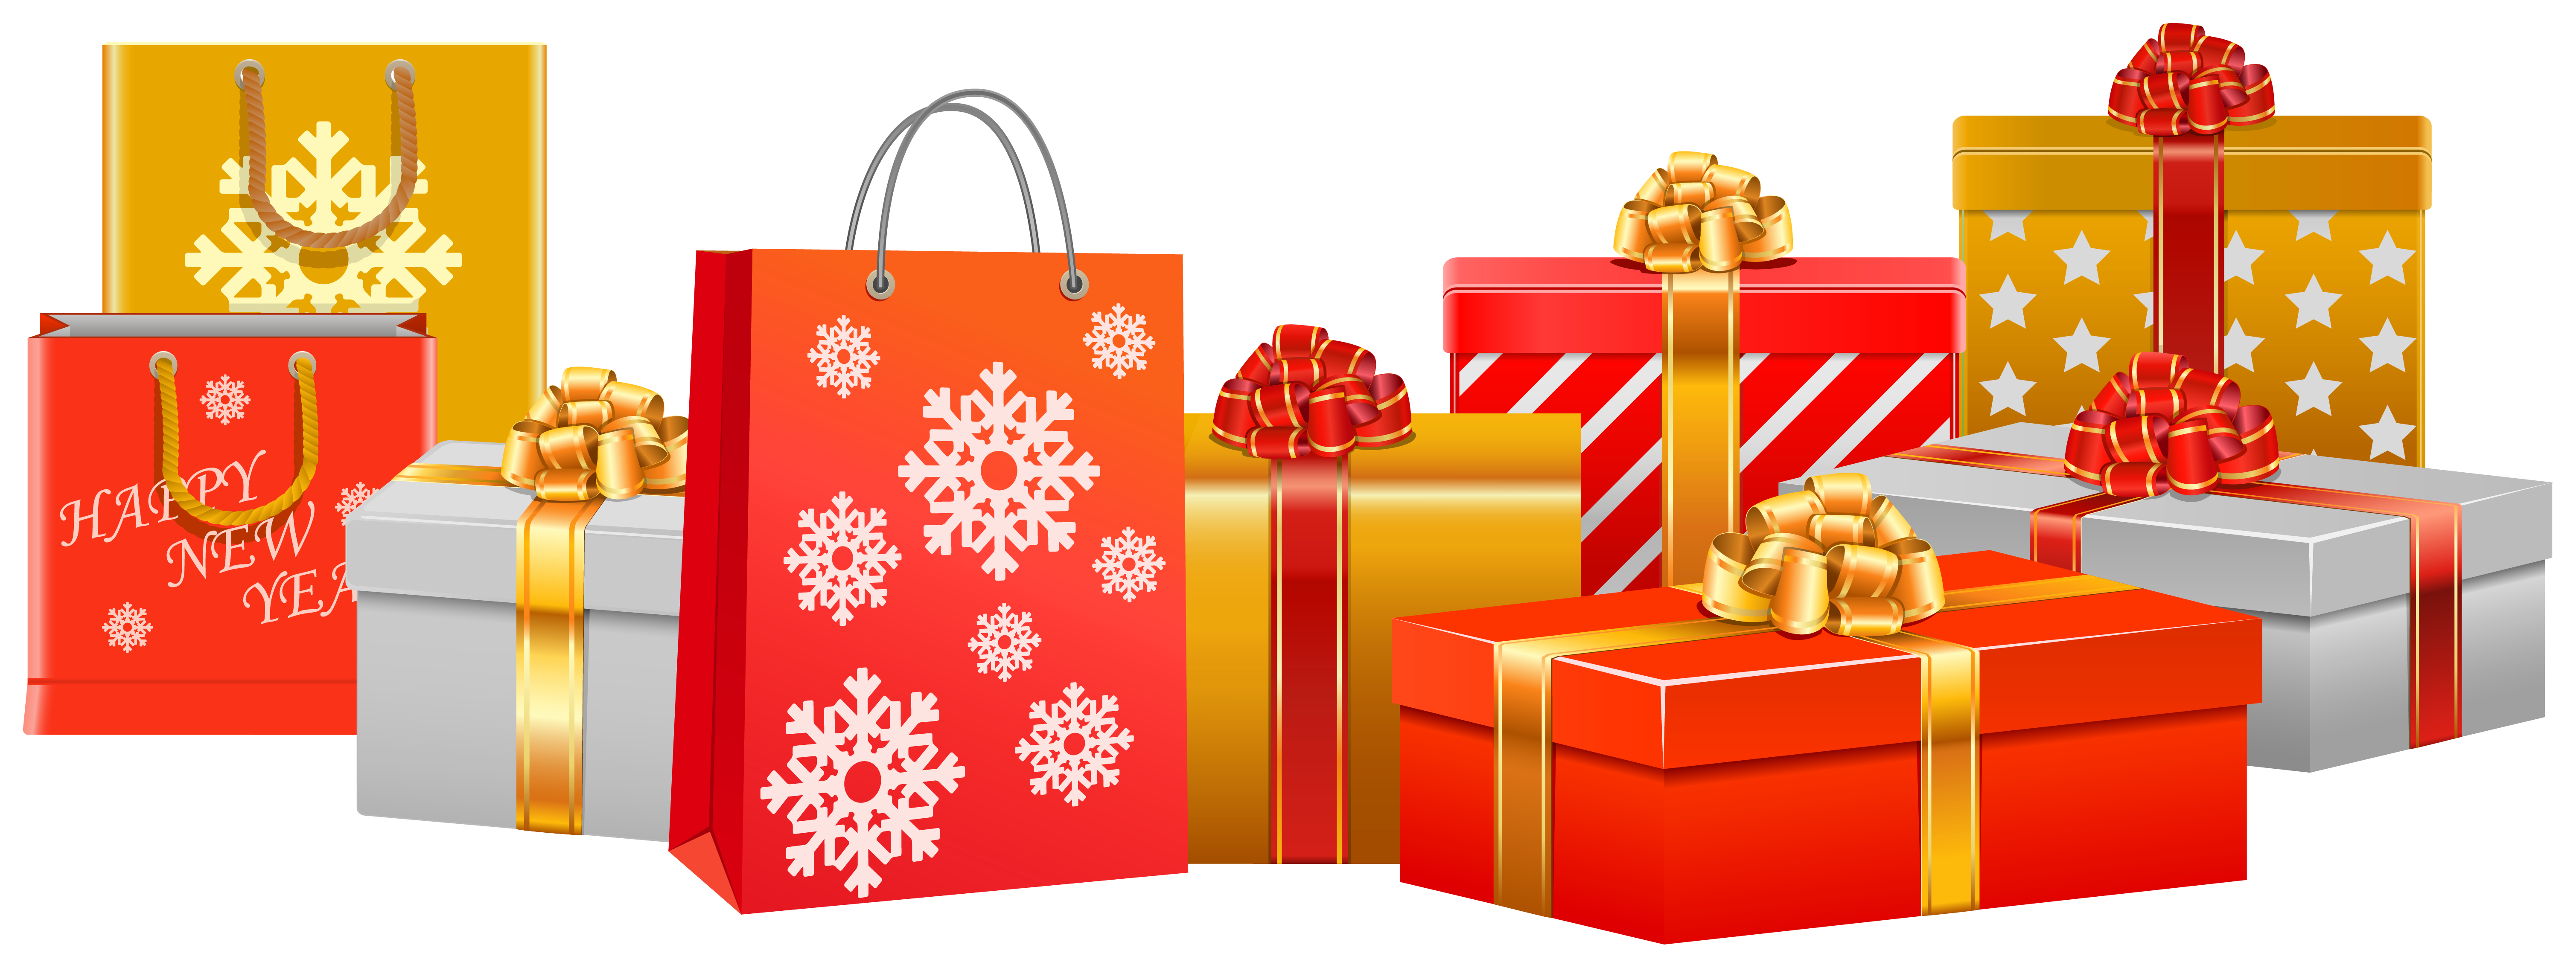 Free Christmas Gifts Cliparts. Birthday #53201.